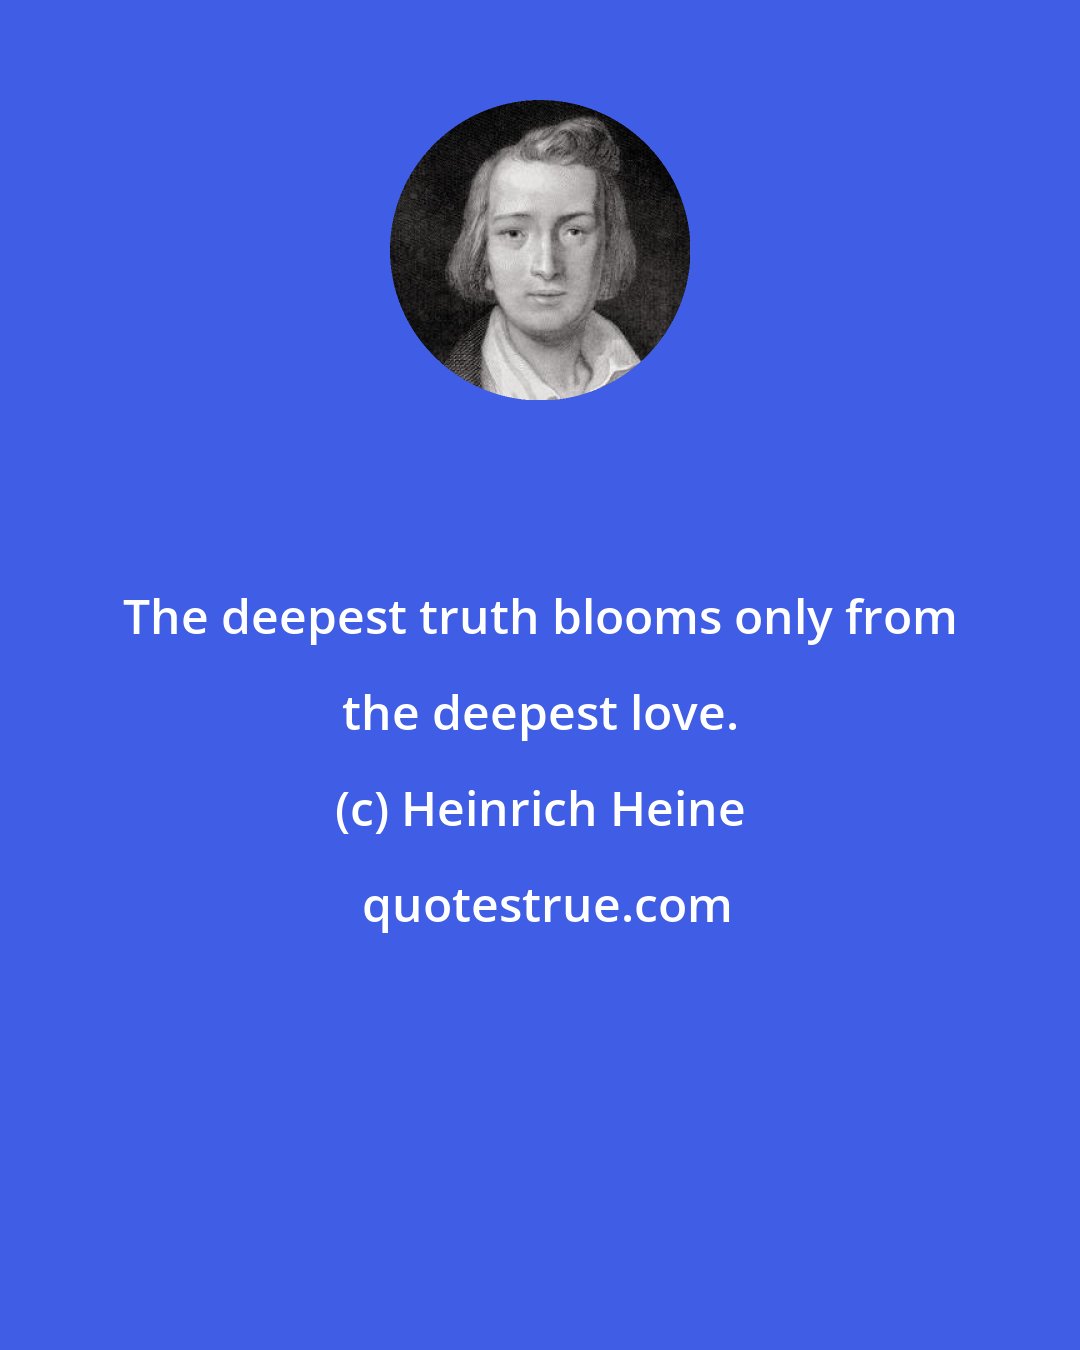 Heinrich Heine: The deepest truth blooms only from the deepest love.